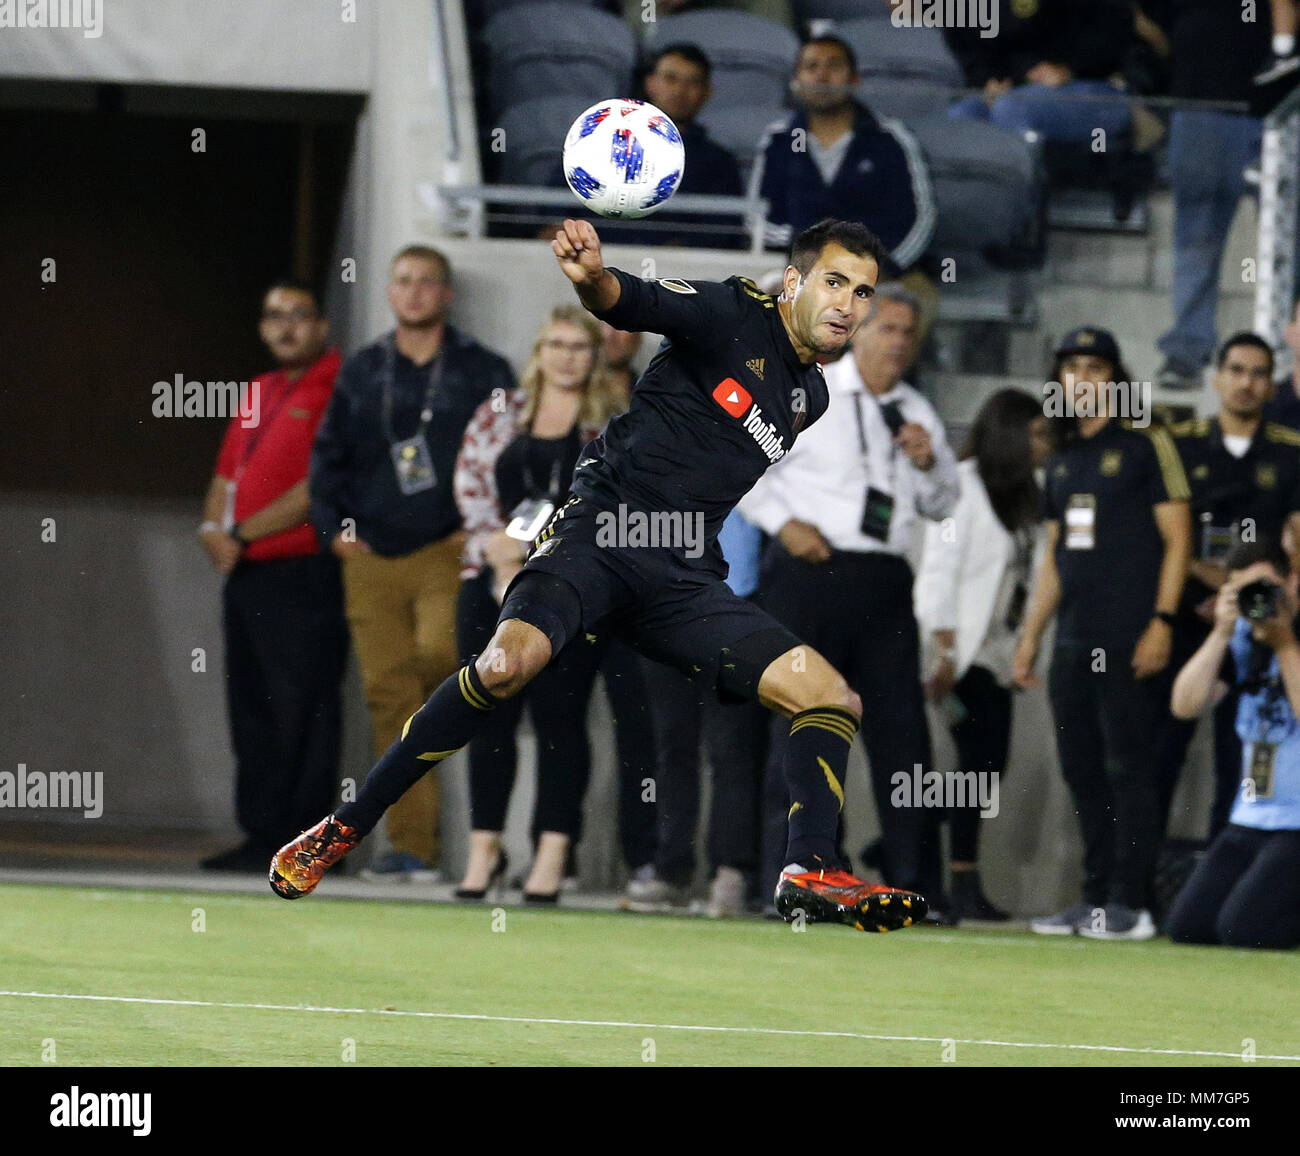 Los Angeles, California, USA. 9th May, 2018. Los Angeles FC defender Steven Beitashour (3) shoots during an MLS soccer game between Los Angeles FC and Minnesota United at Banc of California Stadium in Los Angeles, Wednesday, May 9, 2018. The LAFC won 2-0. Credit: Ringo Chiu/ZUMA Wire/Alamy Live News Stock Photo